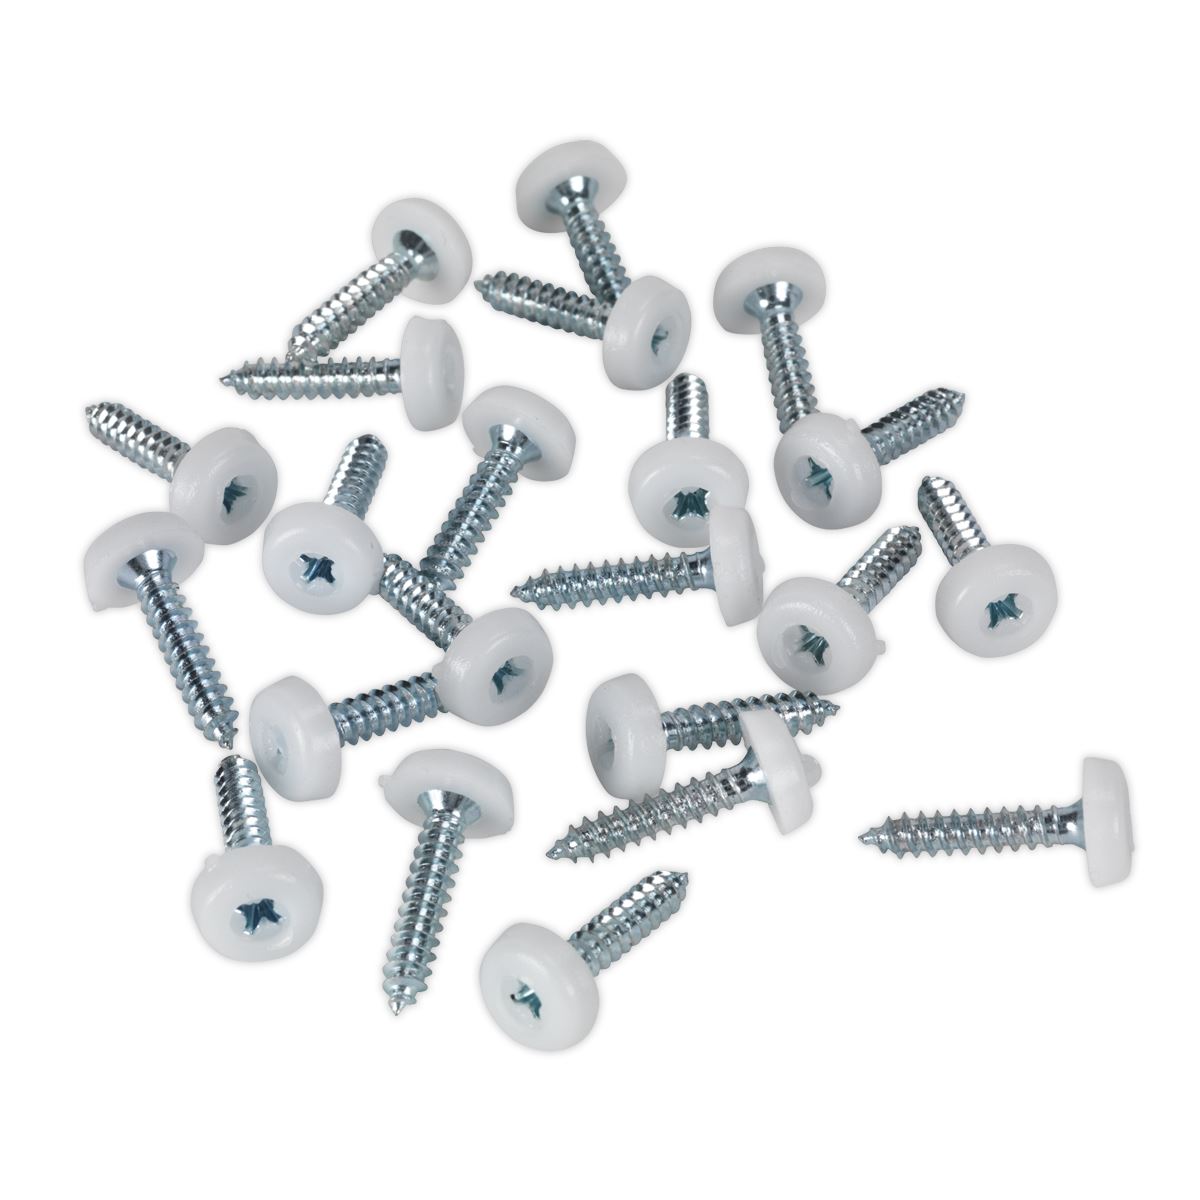 Sealey Numberplate Screw Plastic Enclosed Head 4.8 x 24mm White Pack of 50